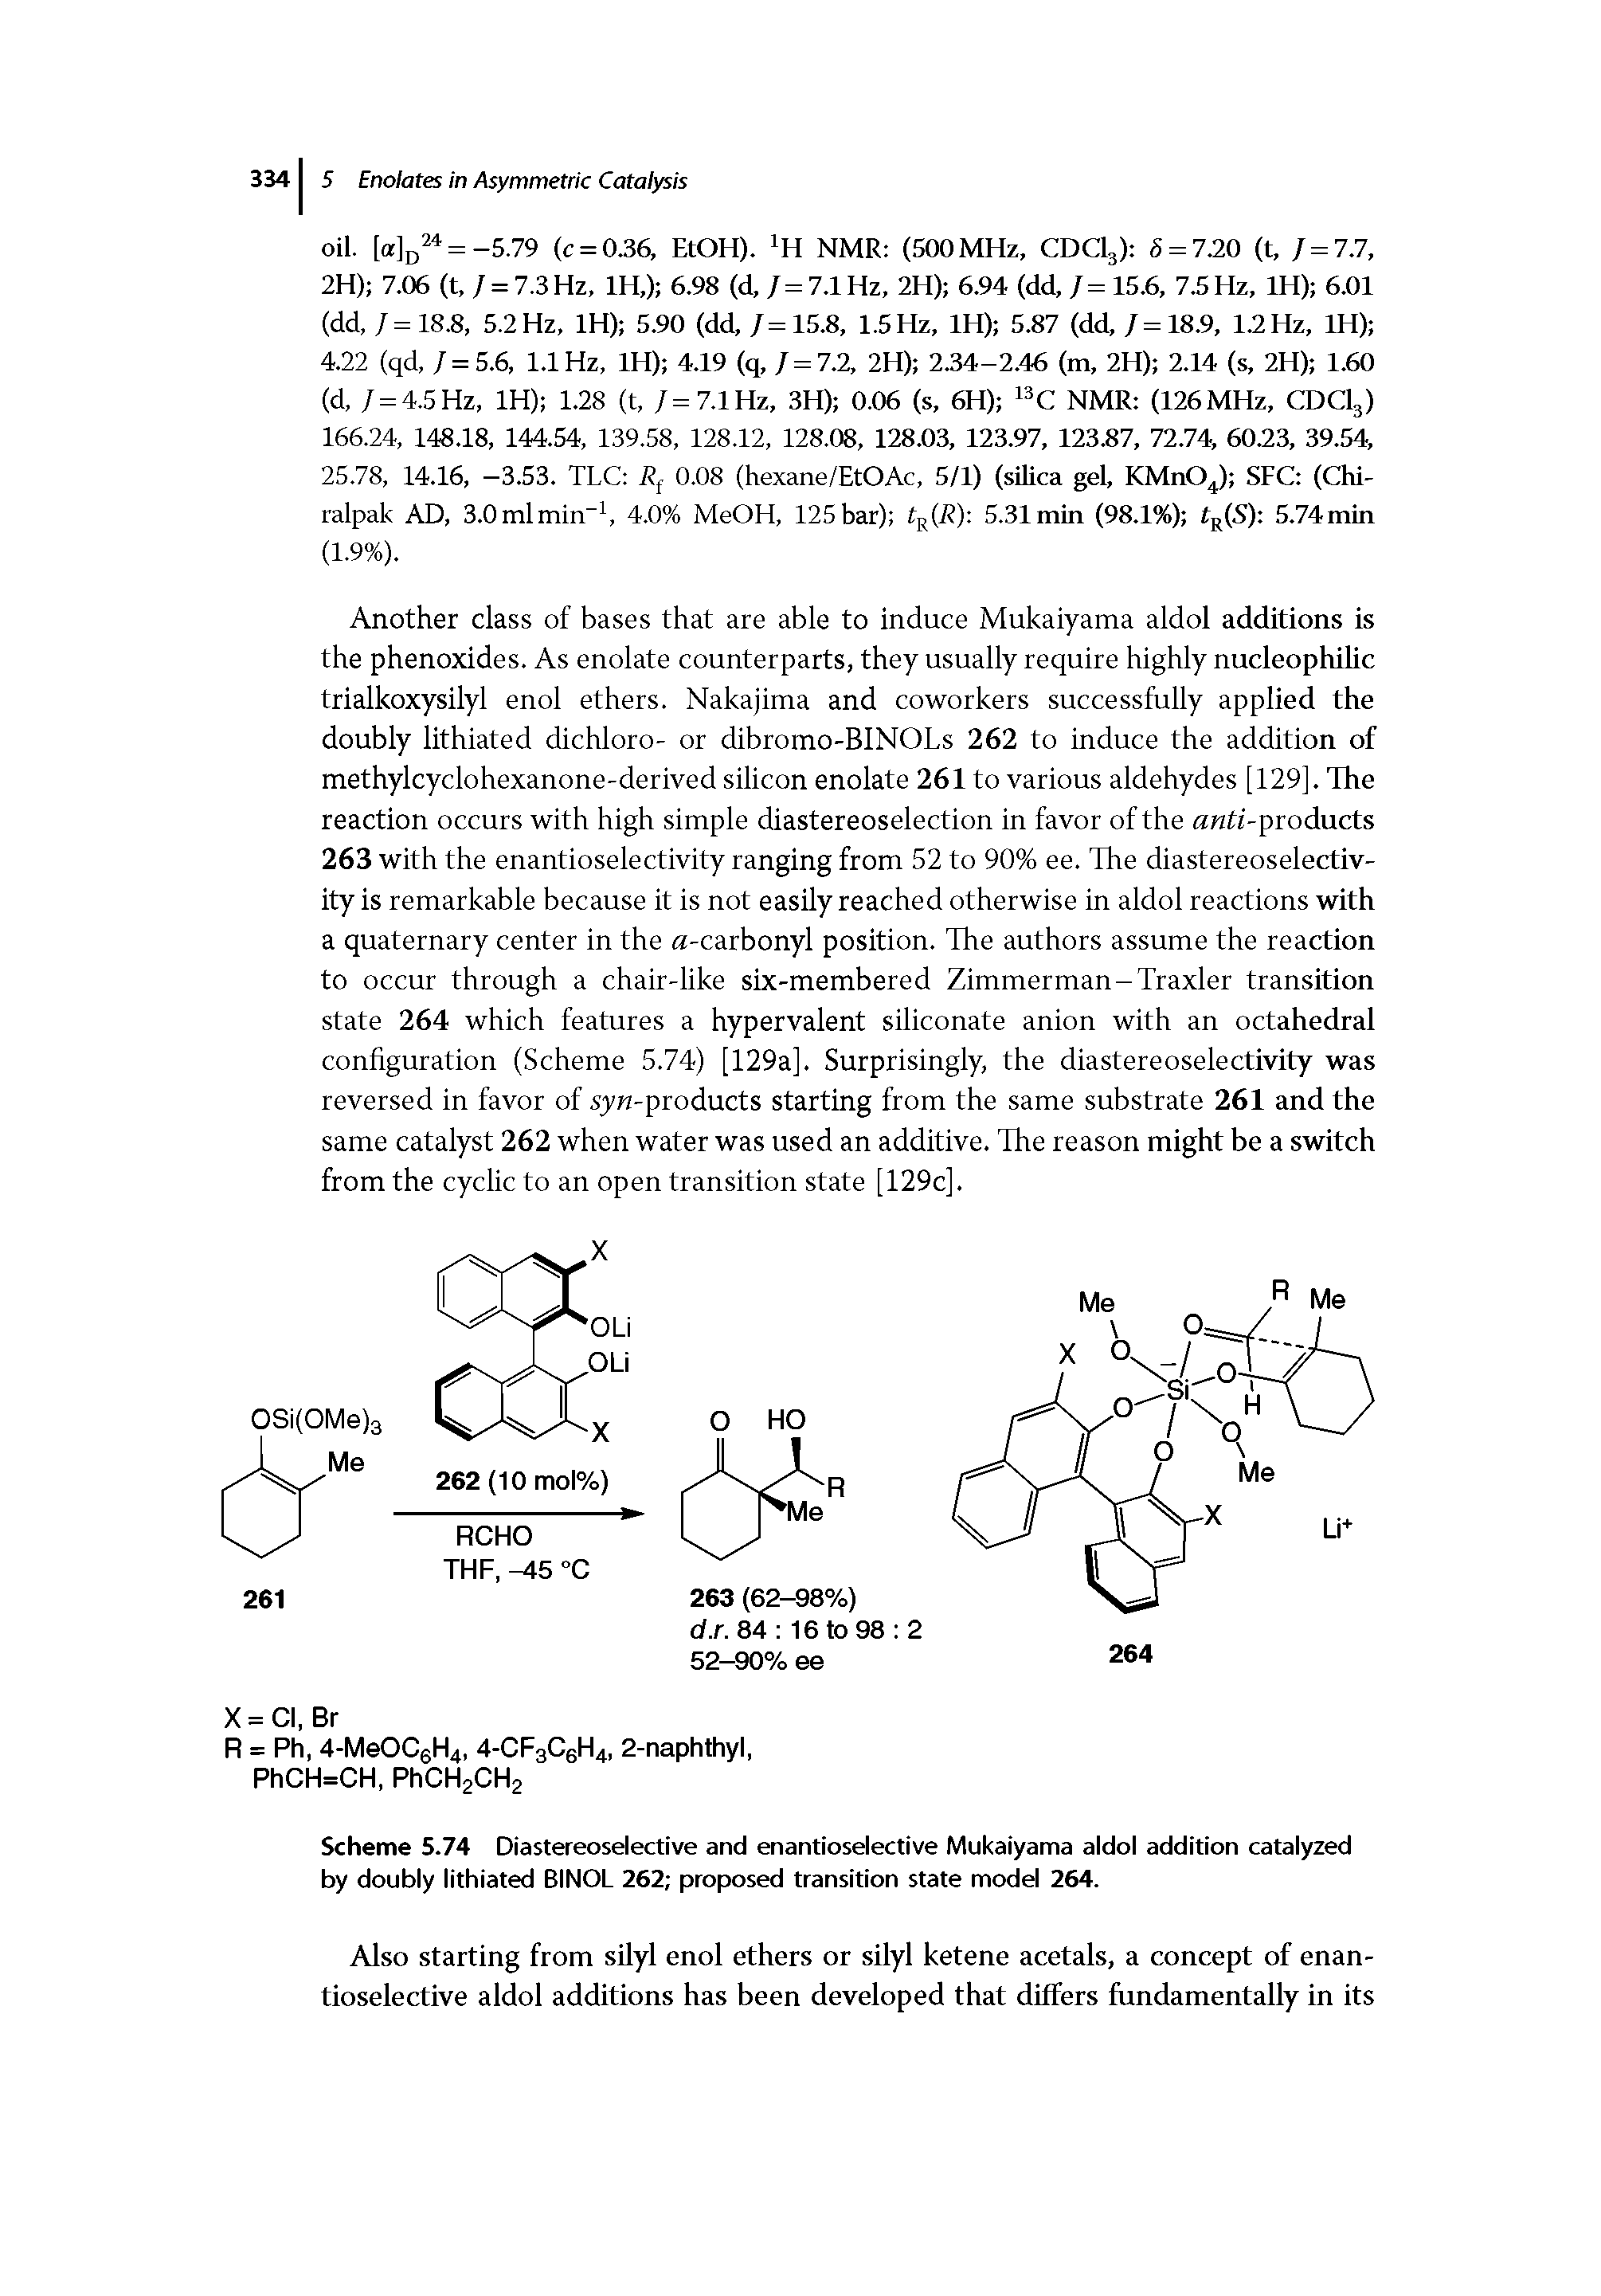 Scheme 5.74 Diastereoselective and enantioselective Mukaiyama aldol addition catalyzed by doubly lithiated BINOL 262 proposed transition state model 264.